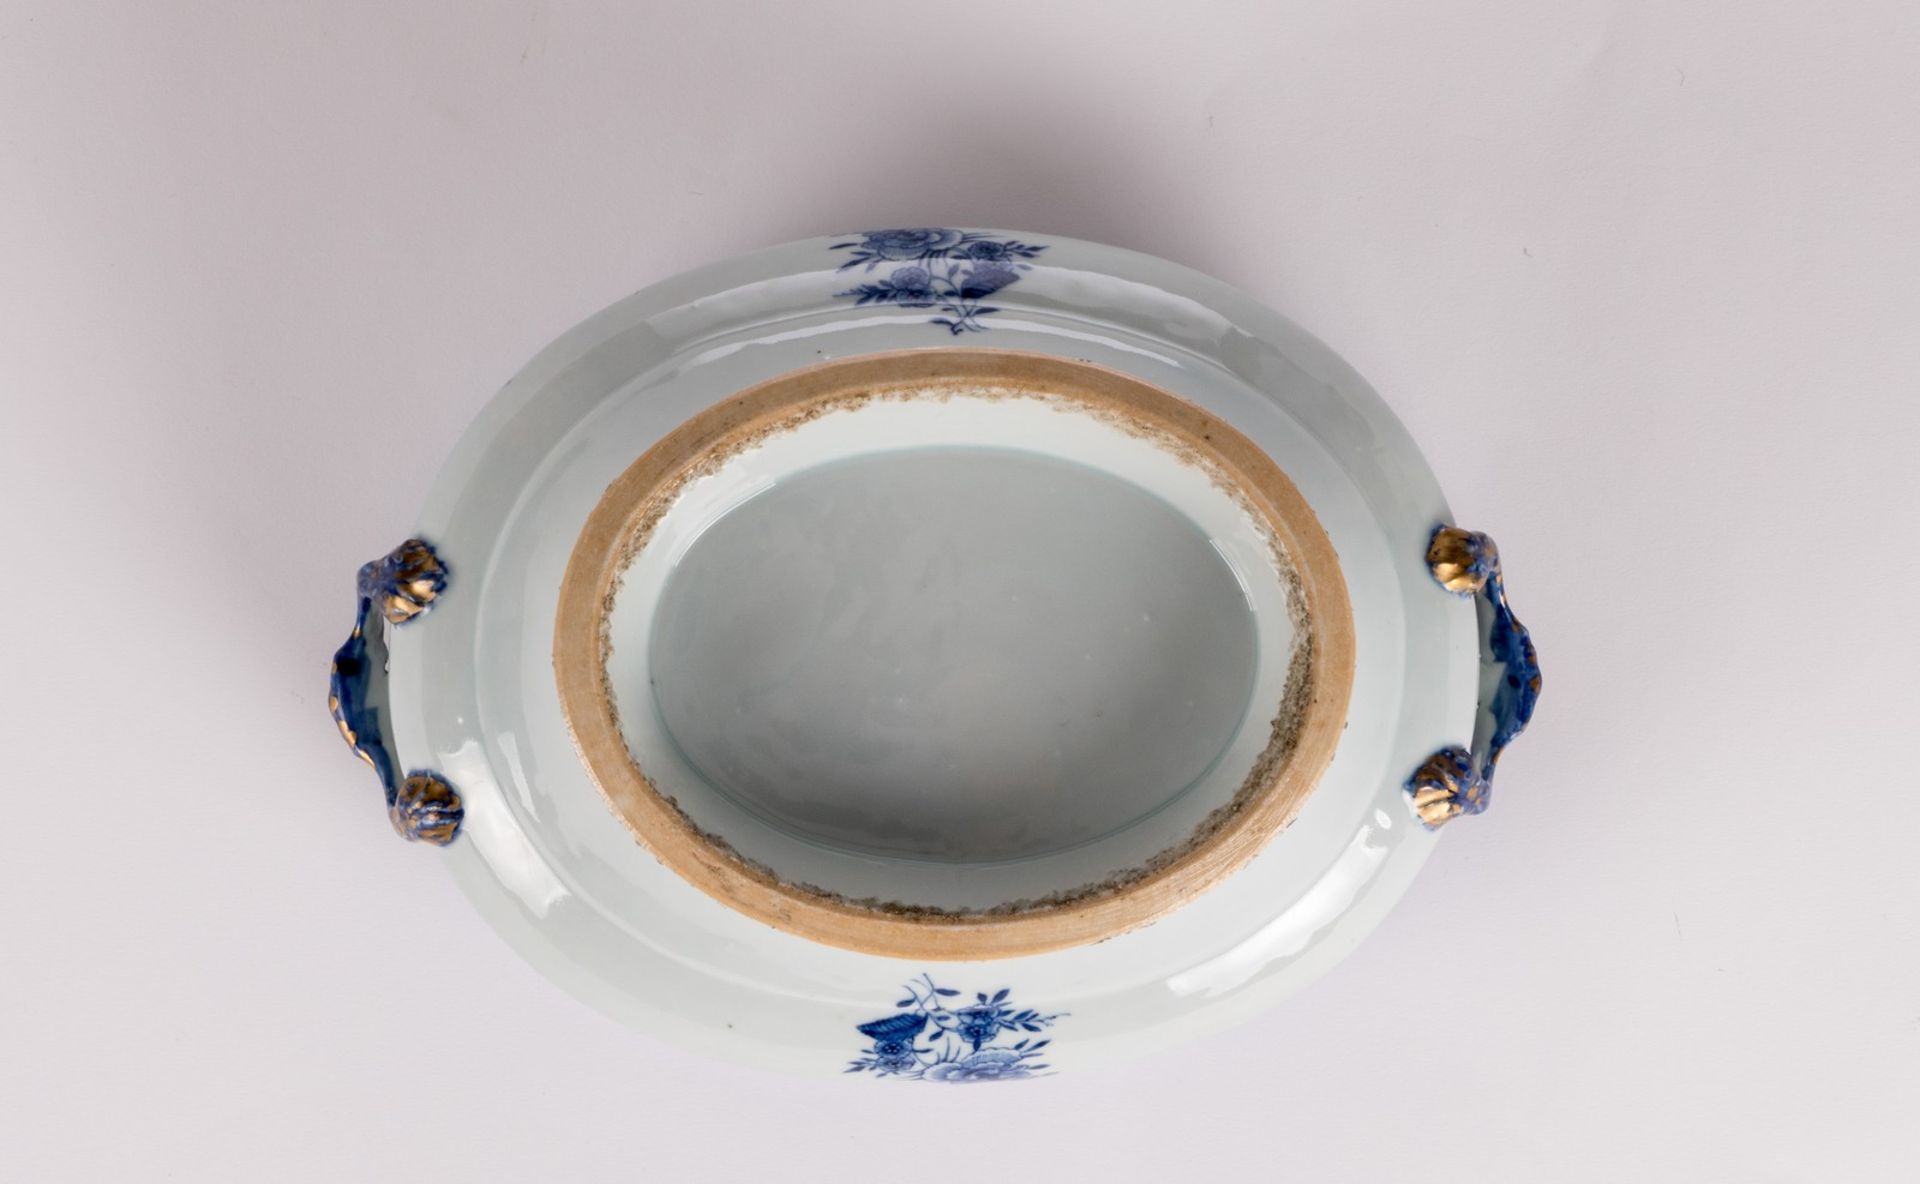 A Chinese blue and white and gilt decorated tureen on a matching plate with floral motives, 18thC; - Image 16 of 16